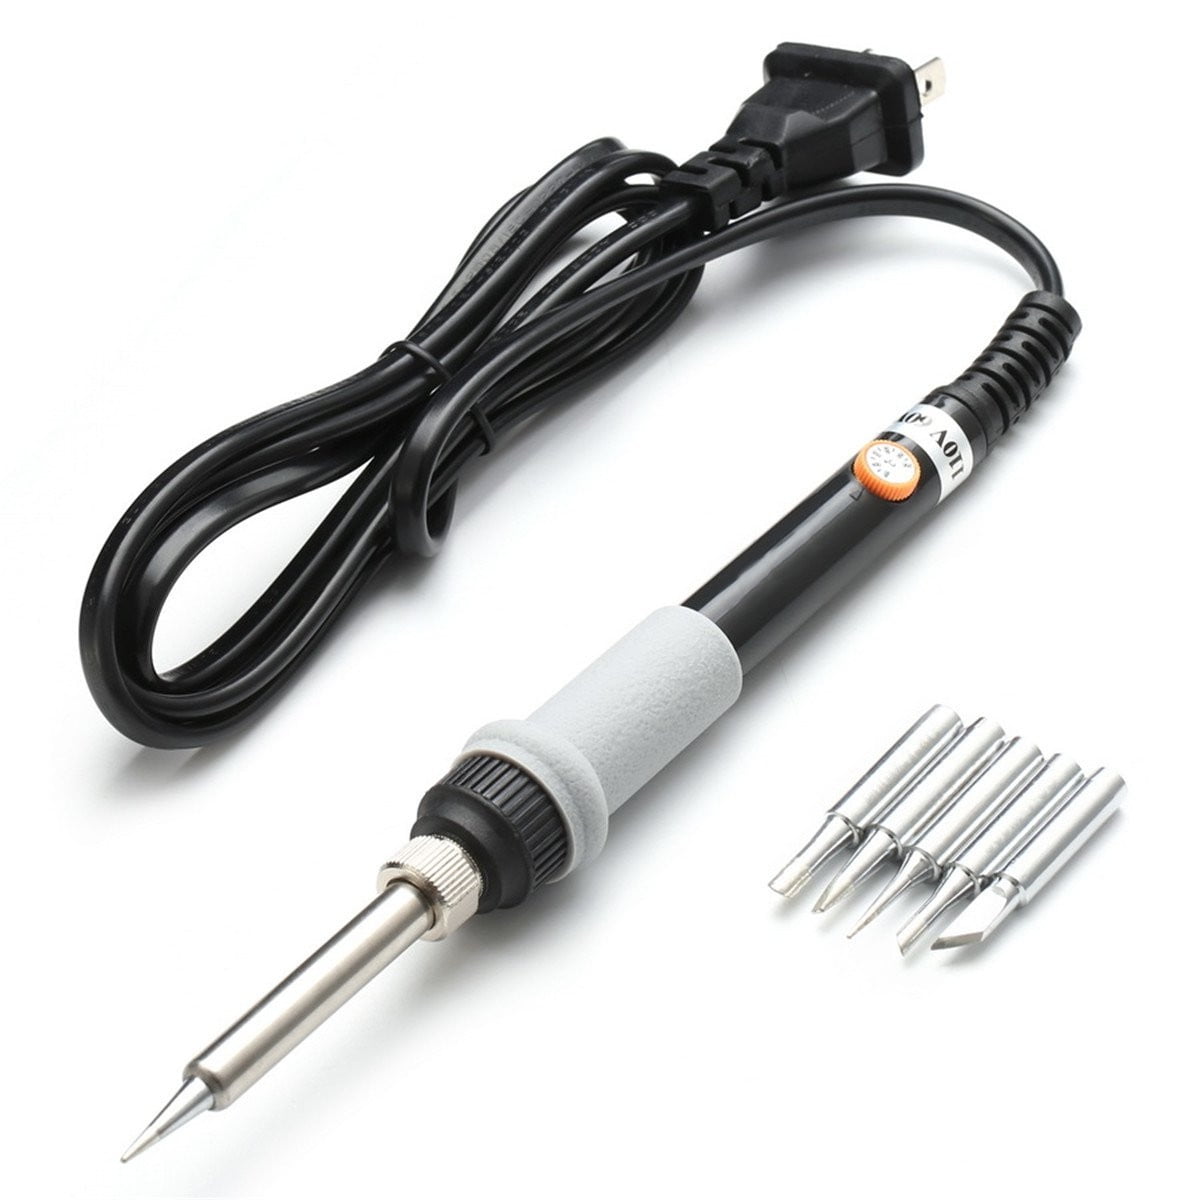 110V/220V 60W Adjustable Electric Temperature Welding Soldering Iron Tool